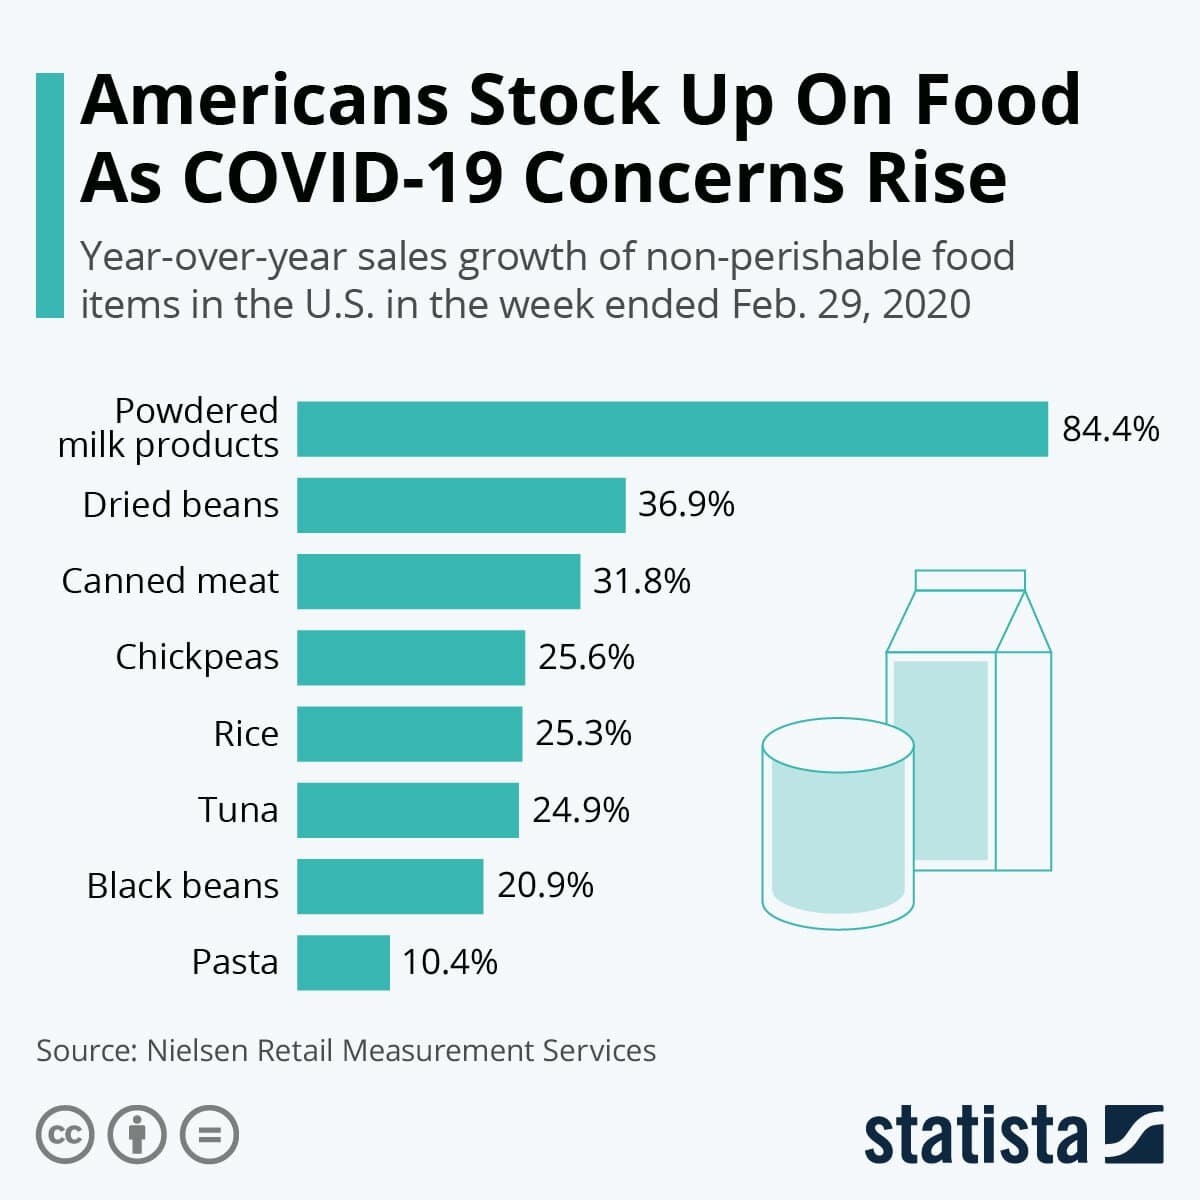 Americans Stock Up On Food as COVID-19 Concerns Rise